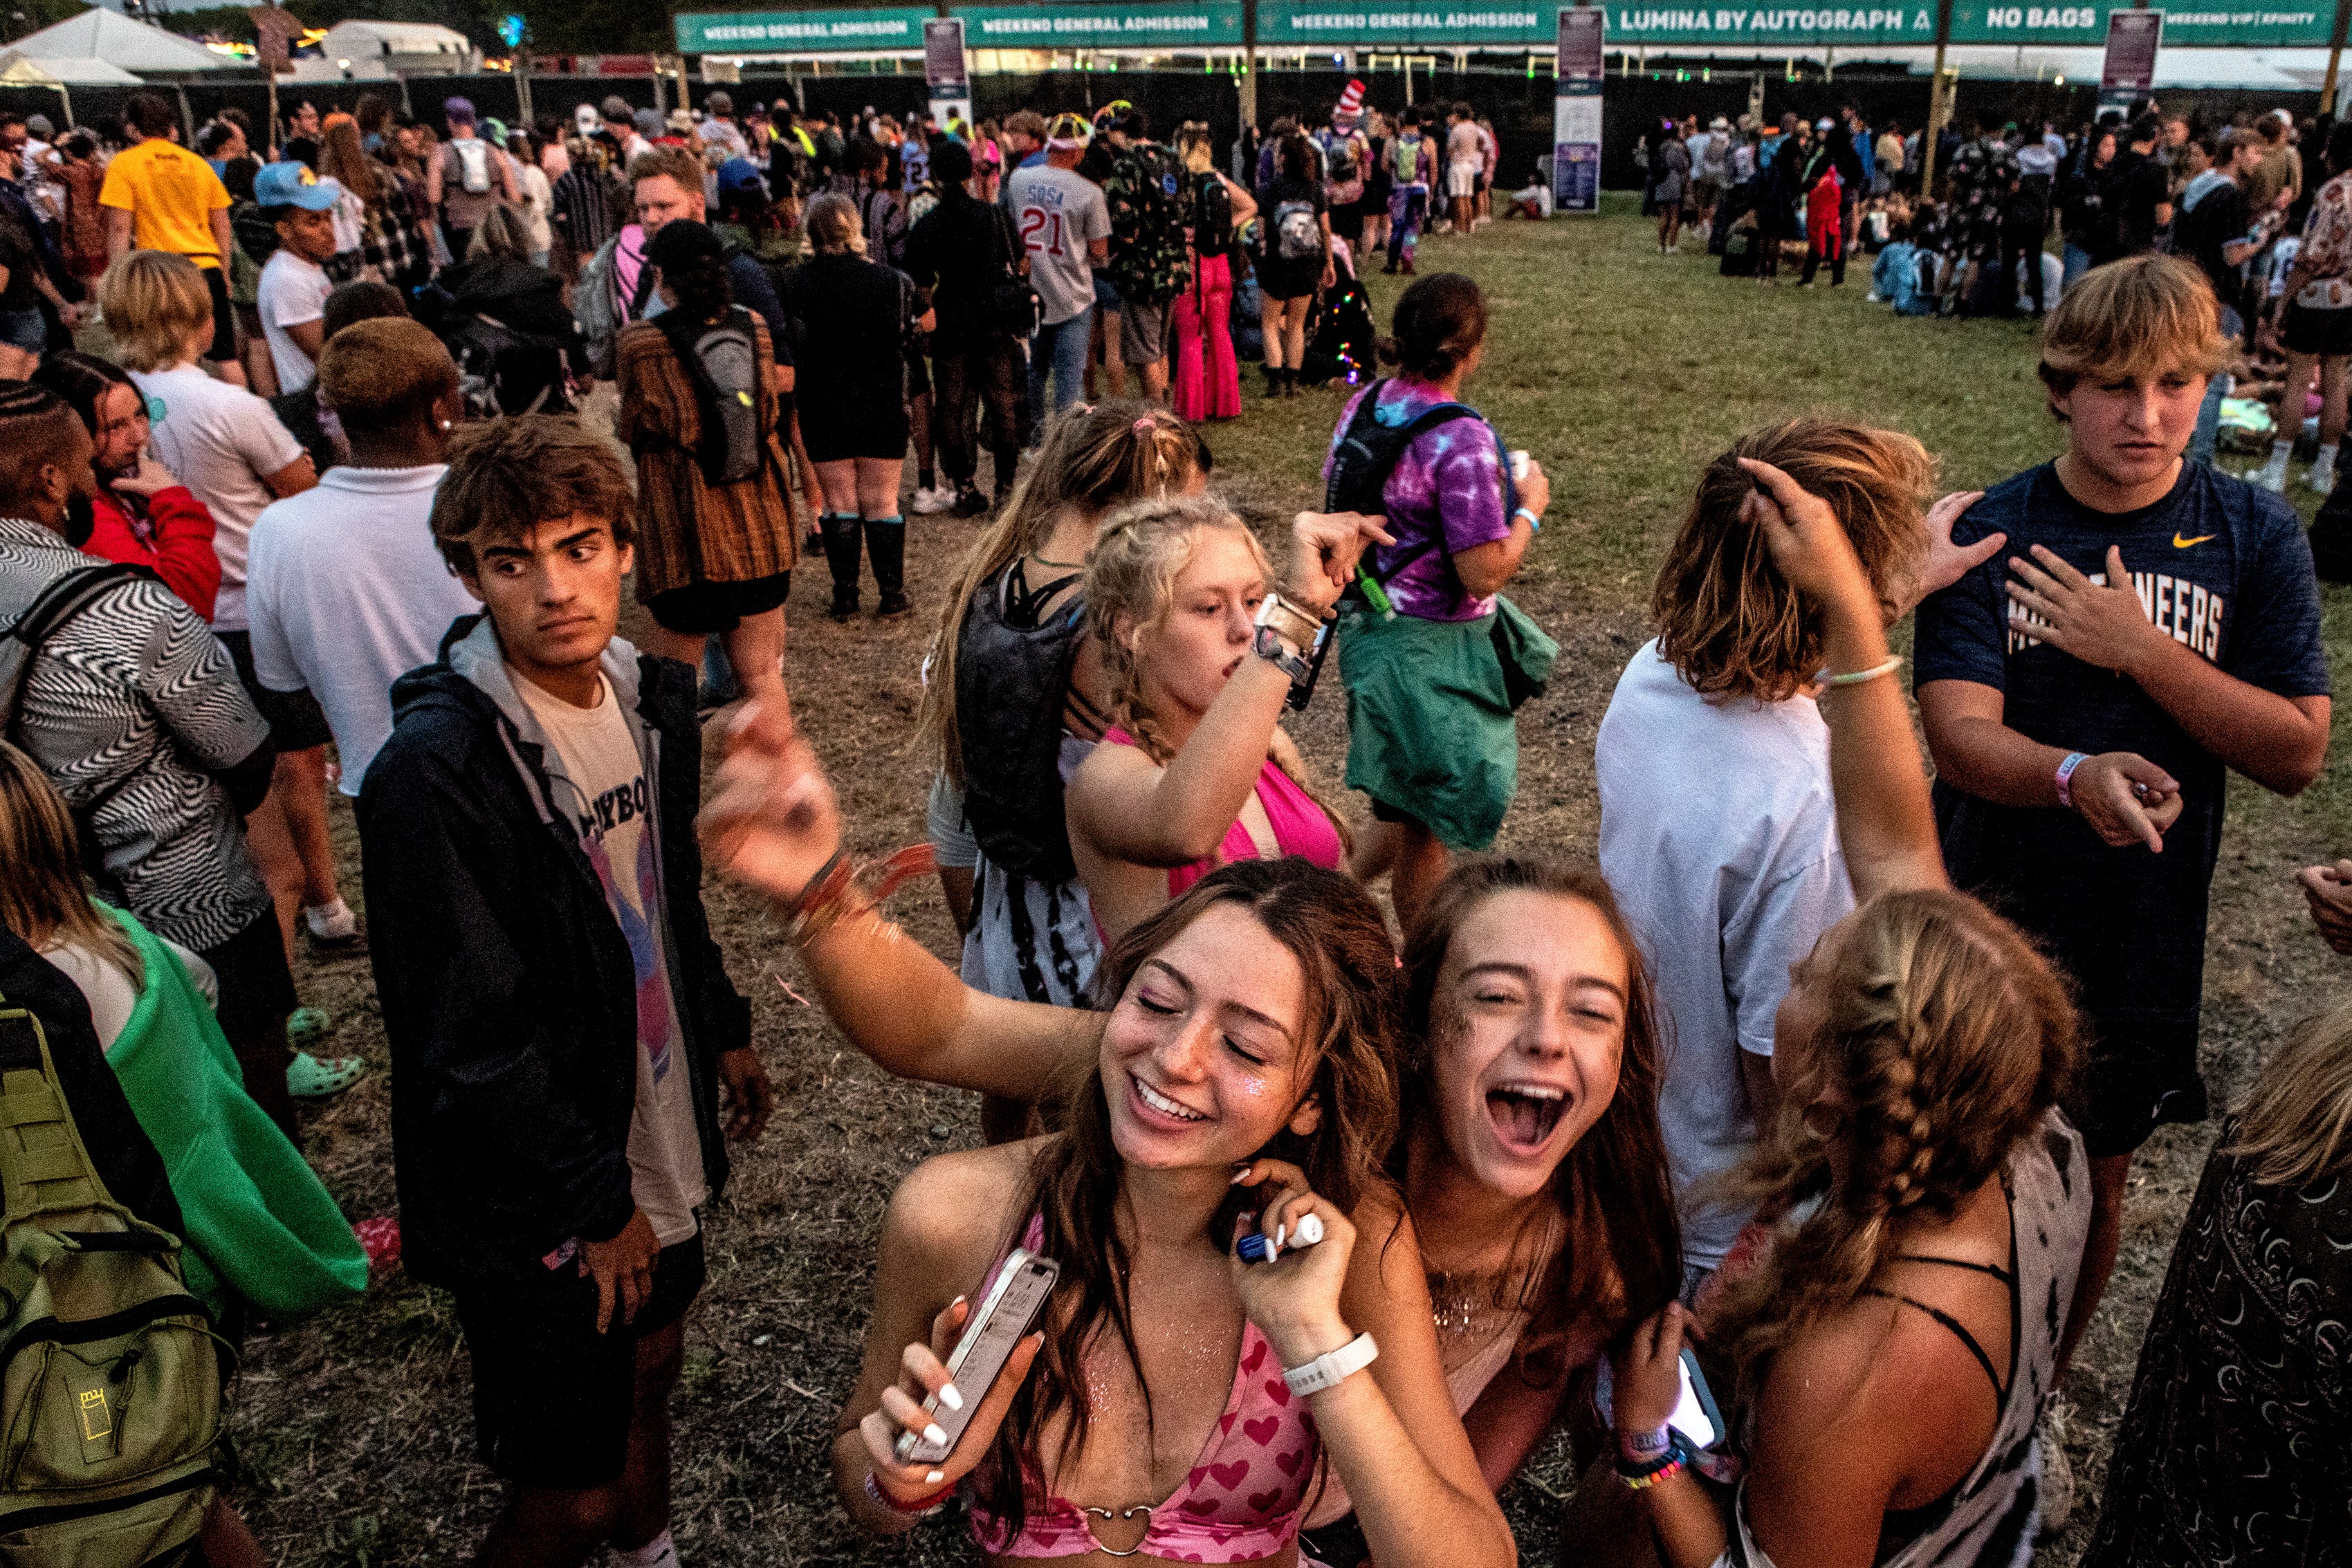 firefly cancels 2024 festival. organizers shine light on event's future & the woodlands